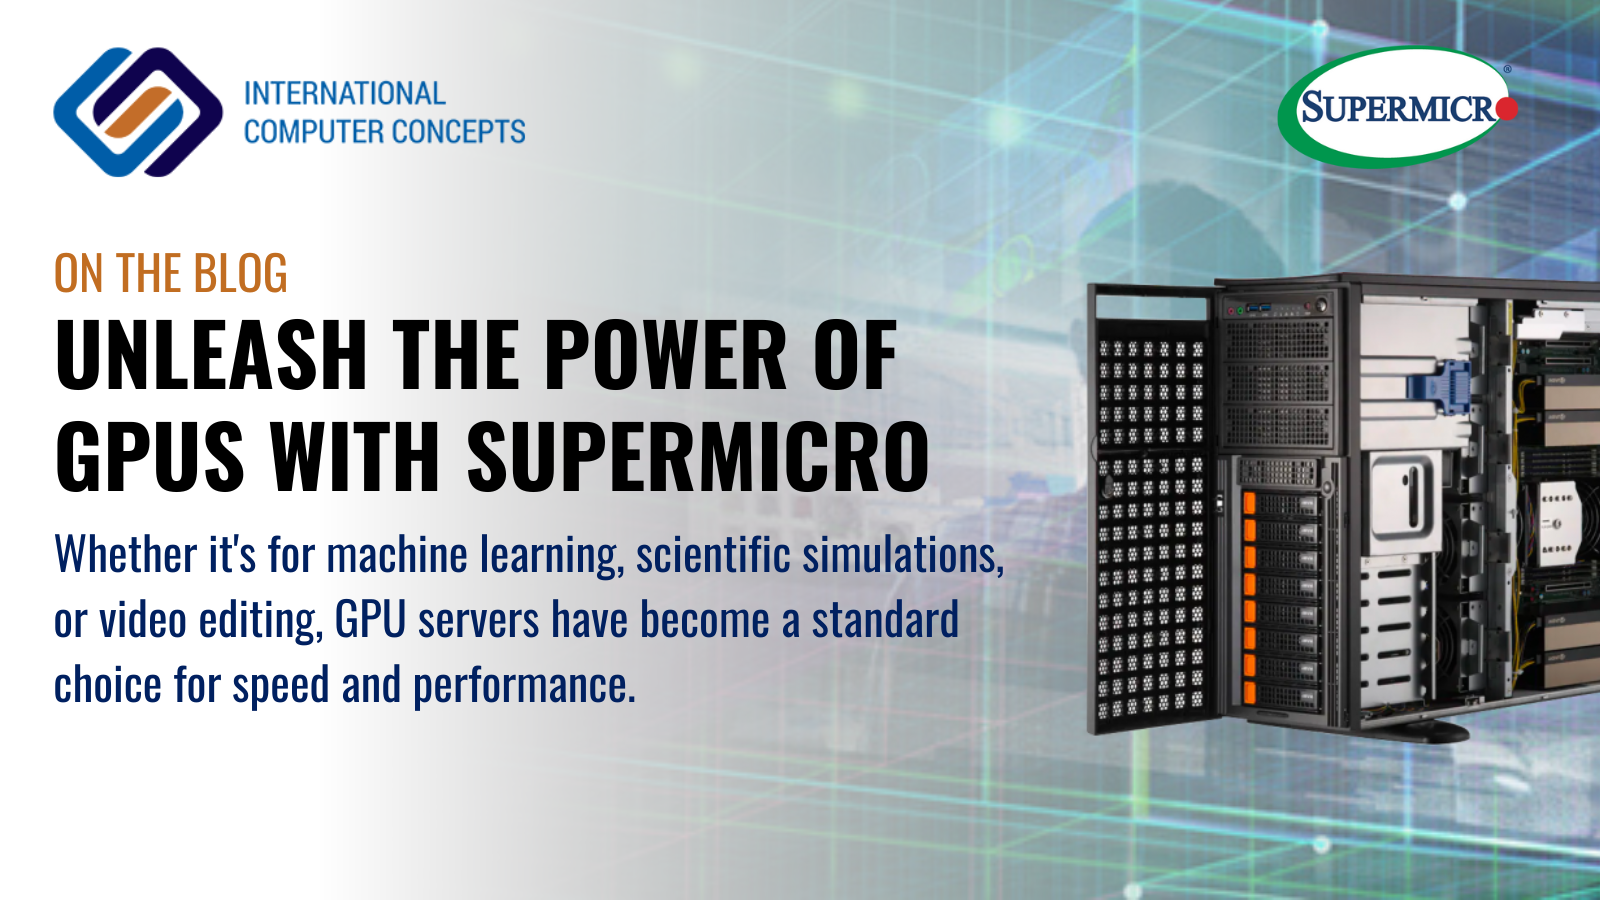 Unleash the Power of GPUs with Supermicro